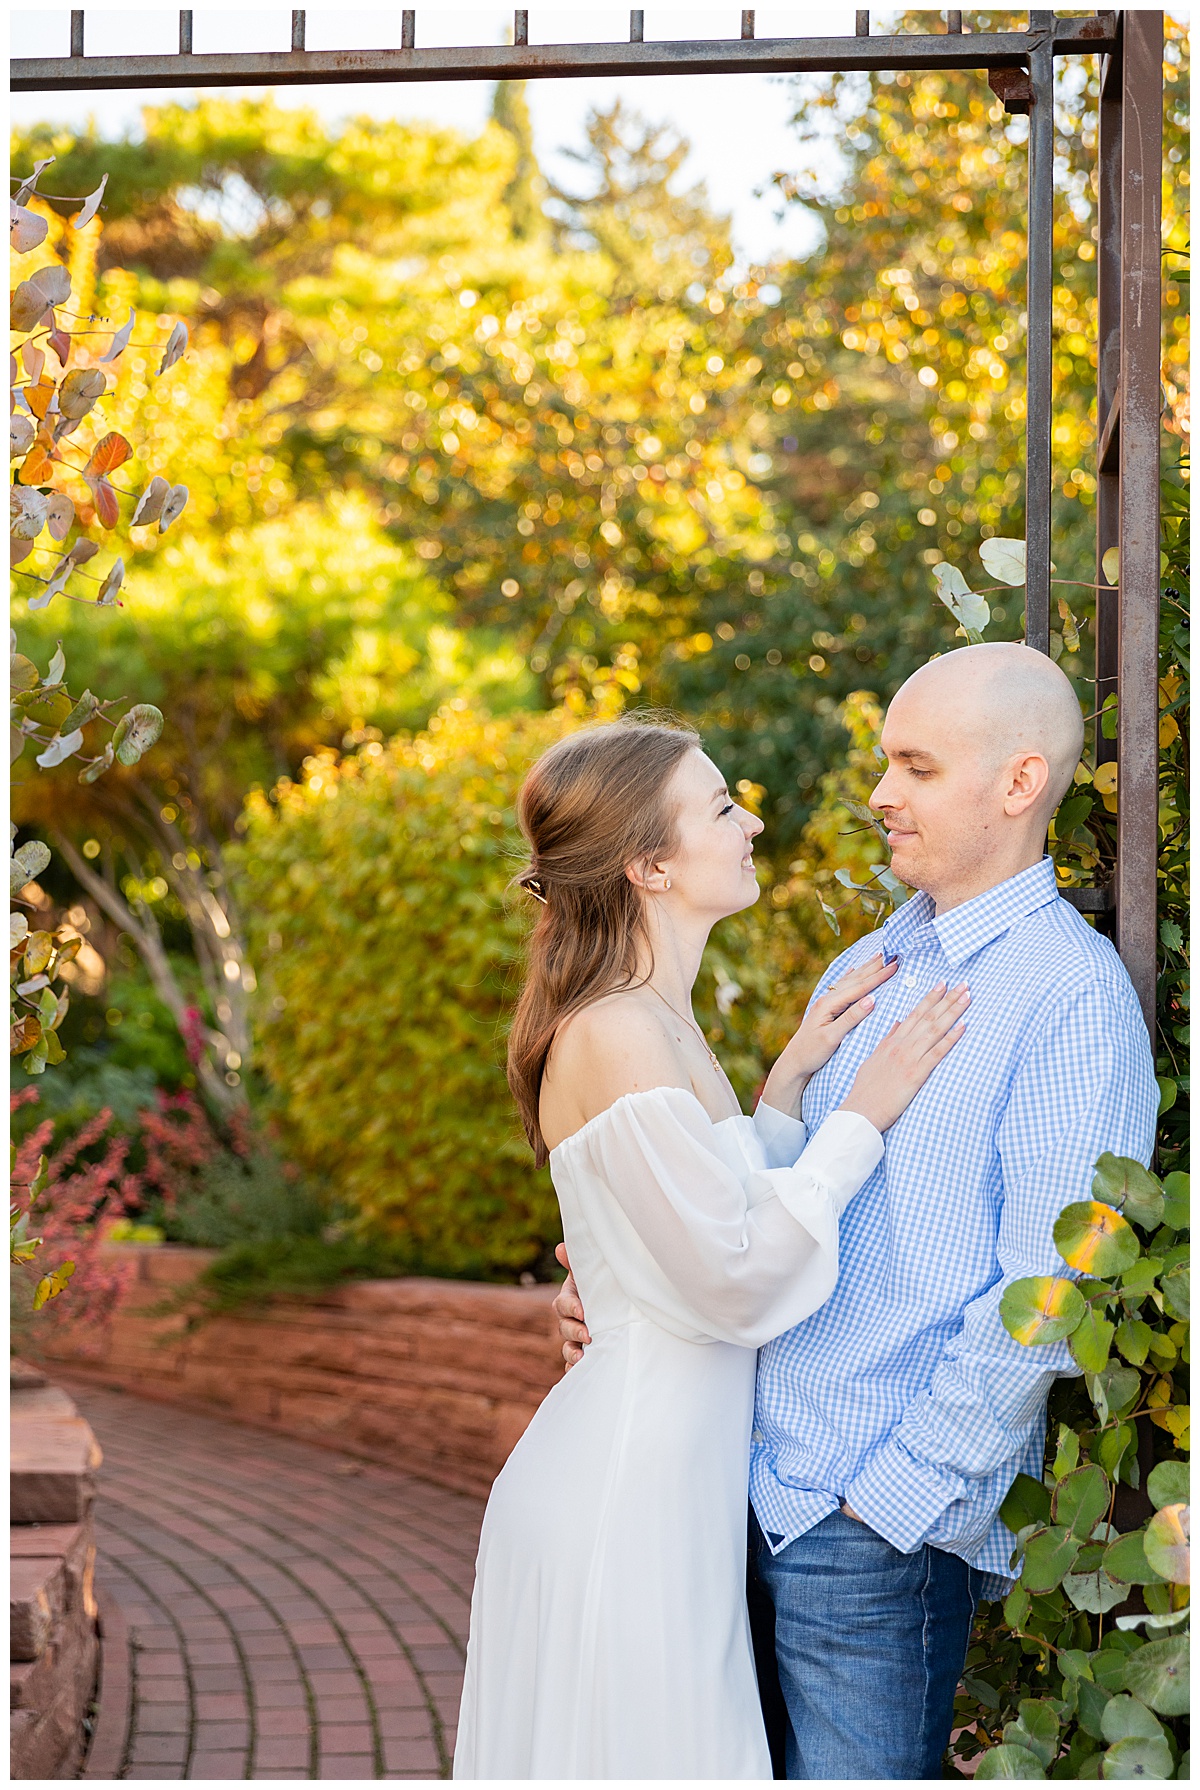 A couple poses for their botanic gardens engagement session. The blonde woman is wearing a white long sleeve dress and the bald man is wearing a blue plaid shirt and jeans.